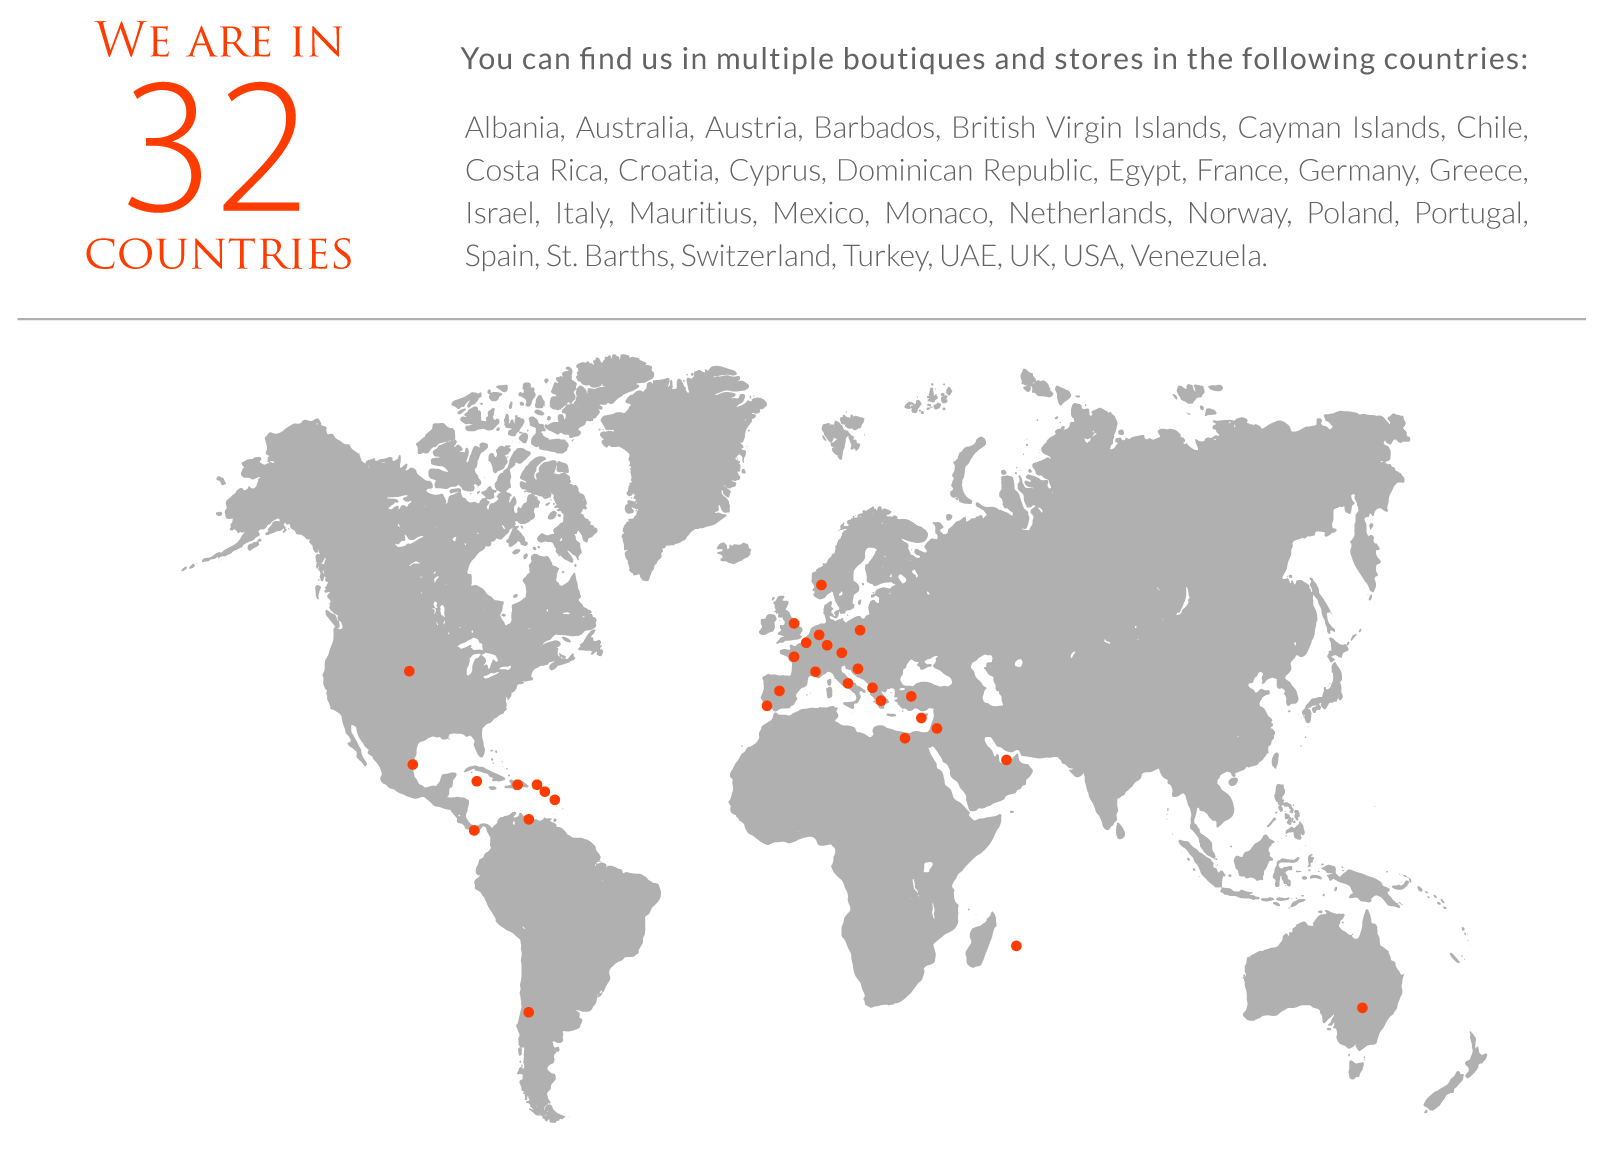 BeMystique Locations - We are in 32 Countries across the world